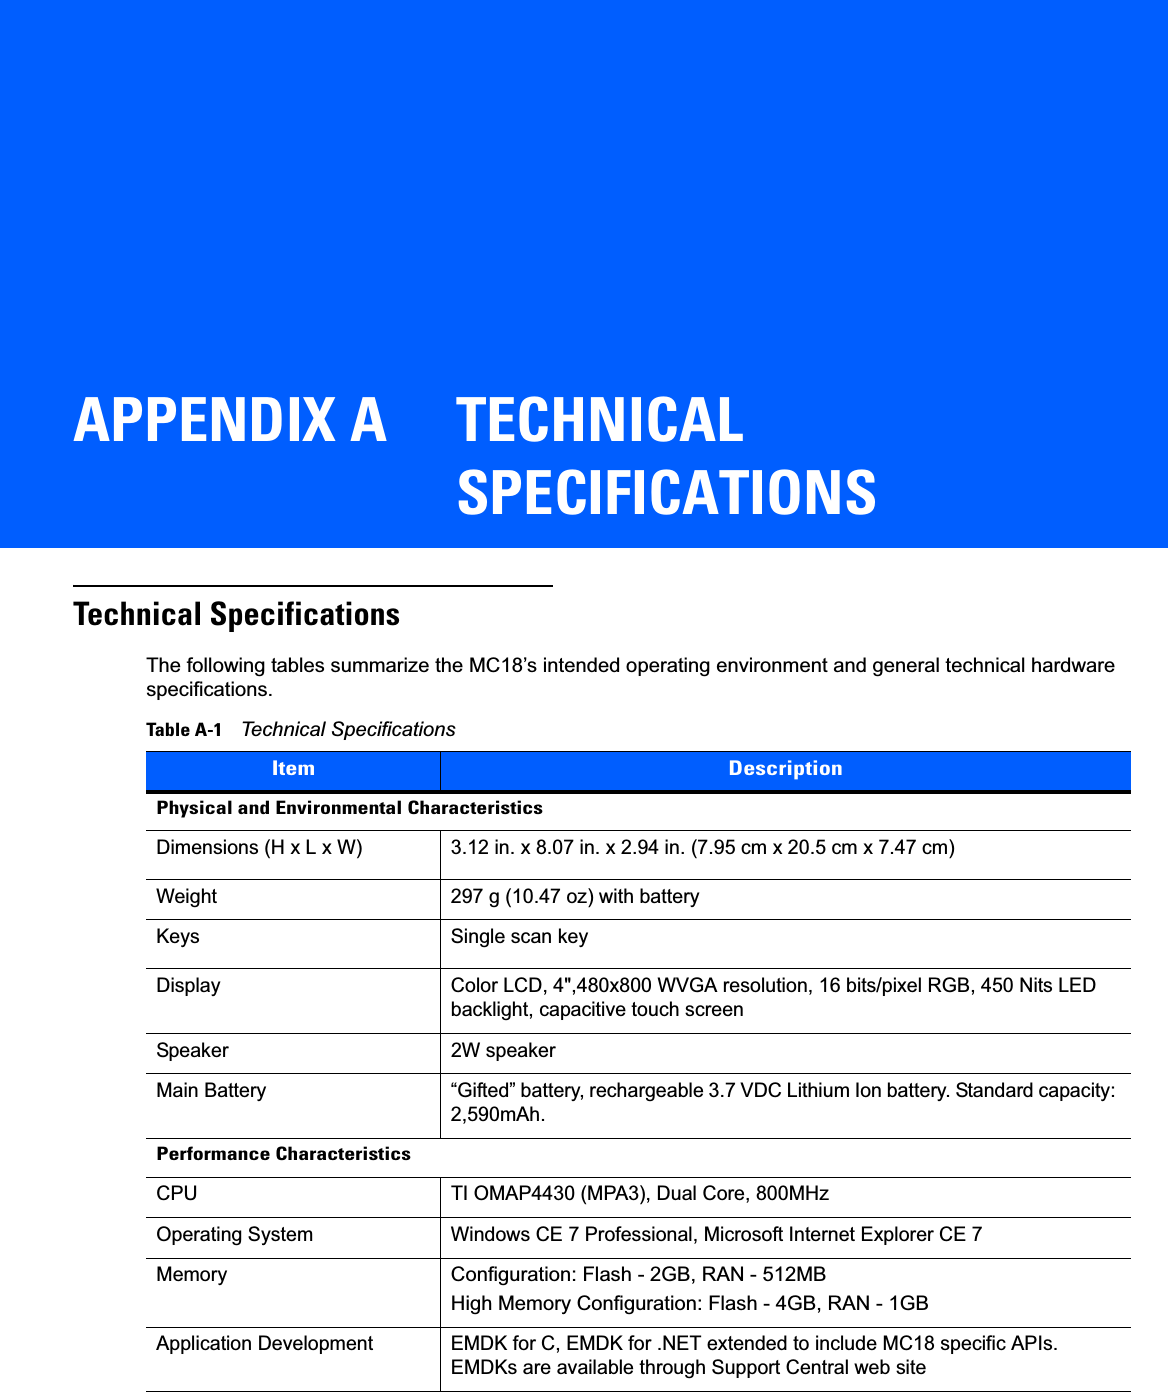 APPENDIX A TECHNICAL SPECIFICATIONSTechnical SpecificationsThe following tables summarize the MC18’s intended operating environment and general technical hardware specifications.Table A-1    Technical SpecificationsItem DescriptionPhysical and Environmental CharacteristicsDimensions (H x L x W) 3.12 in. x 8.07 in. x 2.94 in. (7.95 cm x 20.5 cm x 7.47 cm)Weight 297 g (10.47 oz) with batteryKeys Single scan key Display Color LCD, 4&quot;,480x800 WVGA resolution, 16 bits/pixel RGB, 450 Nits LED backlight, capacitive touch screenSpeaker 2W speakerMain Battery “Gifted” battery, rechargeable 3.7 VDC Lithium Ion battery. Standard capacity: 2,590mAh. Performance CharacteristicsCPU TI OMAP4430 (MPA3), Dual Core, 800MHzOperating System Windows CE 7 Professional, Microsoft Internet Explorer CE 7MemoryConfiguration: Flash - 2GB, RAN - 512MBHigh Memory Configuration: Flash - 4GB, RAN - 1GBApplication Development EMDK for C, EMDK for .NET extended to include MC18 specific APIs. EMDKs are available through Support Central web site